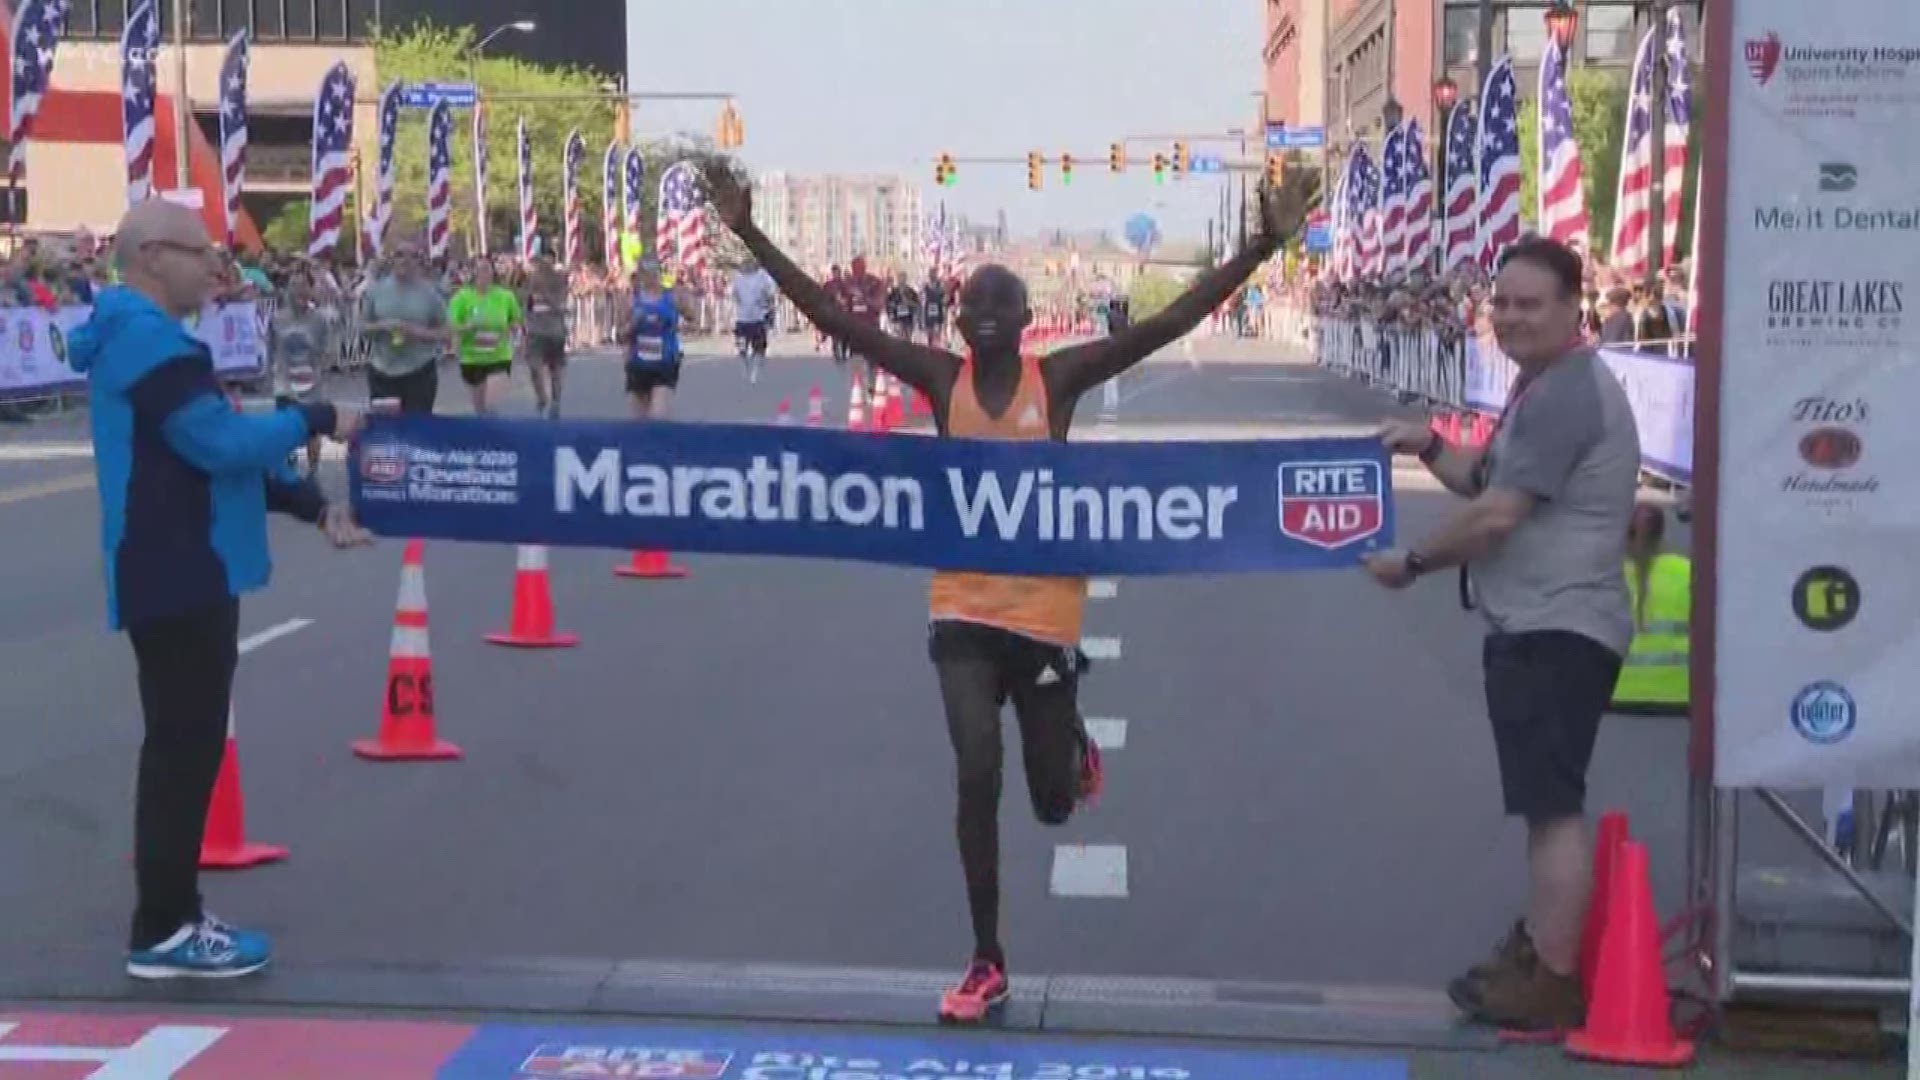 May 19, 2019: A 33-year-old runner from Kenya has been crowned the winner of the 2019 Cleveland Marathon. Edwin Kimaiyo completed the 26.2 mile race in just